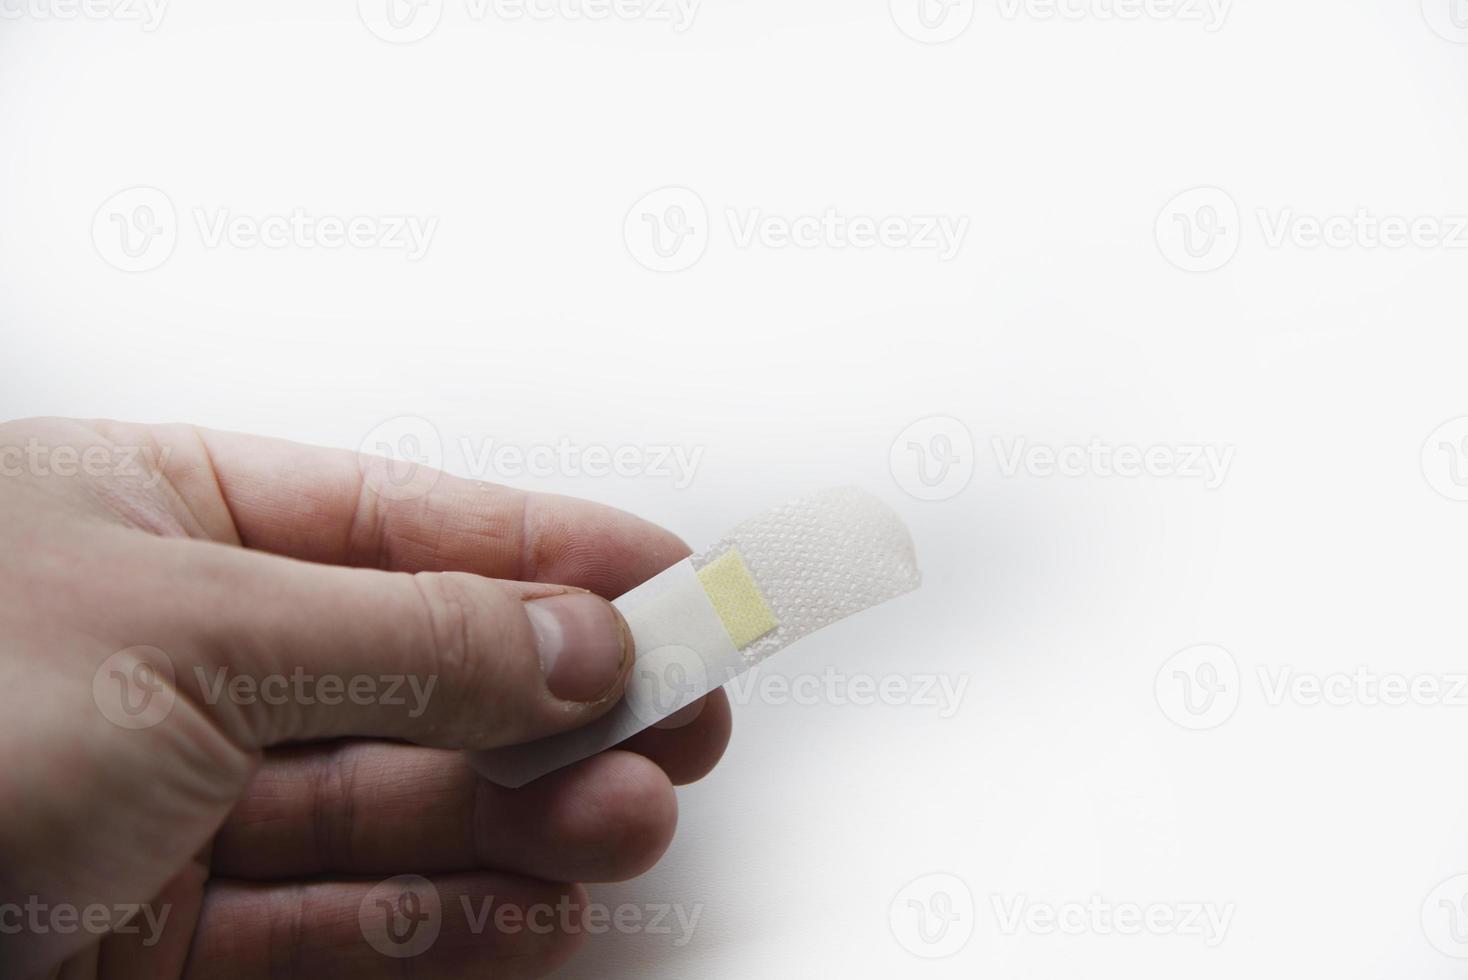 A medical patch on a man's arm on a white background. A yellow patch on the wound on his arm. photo